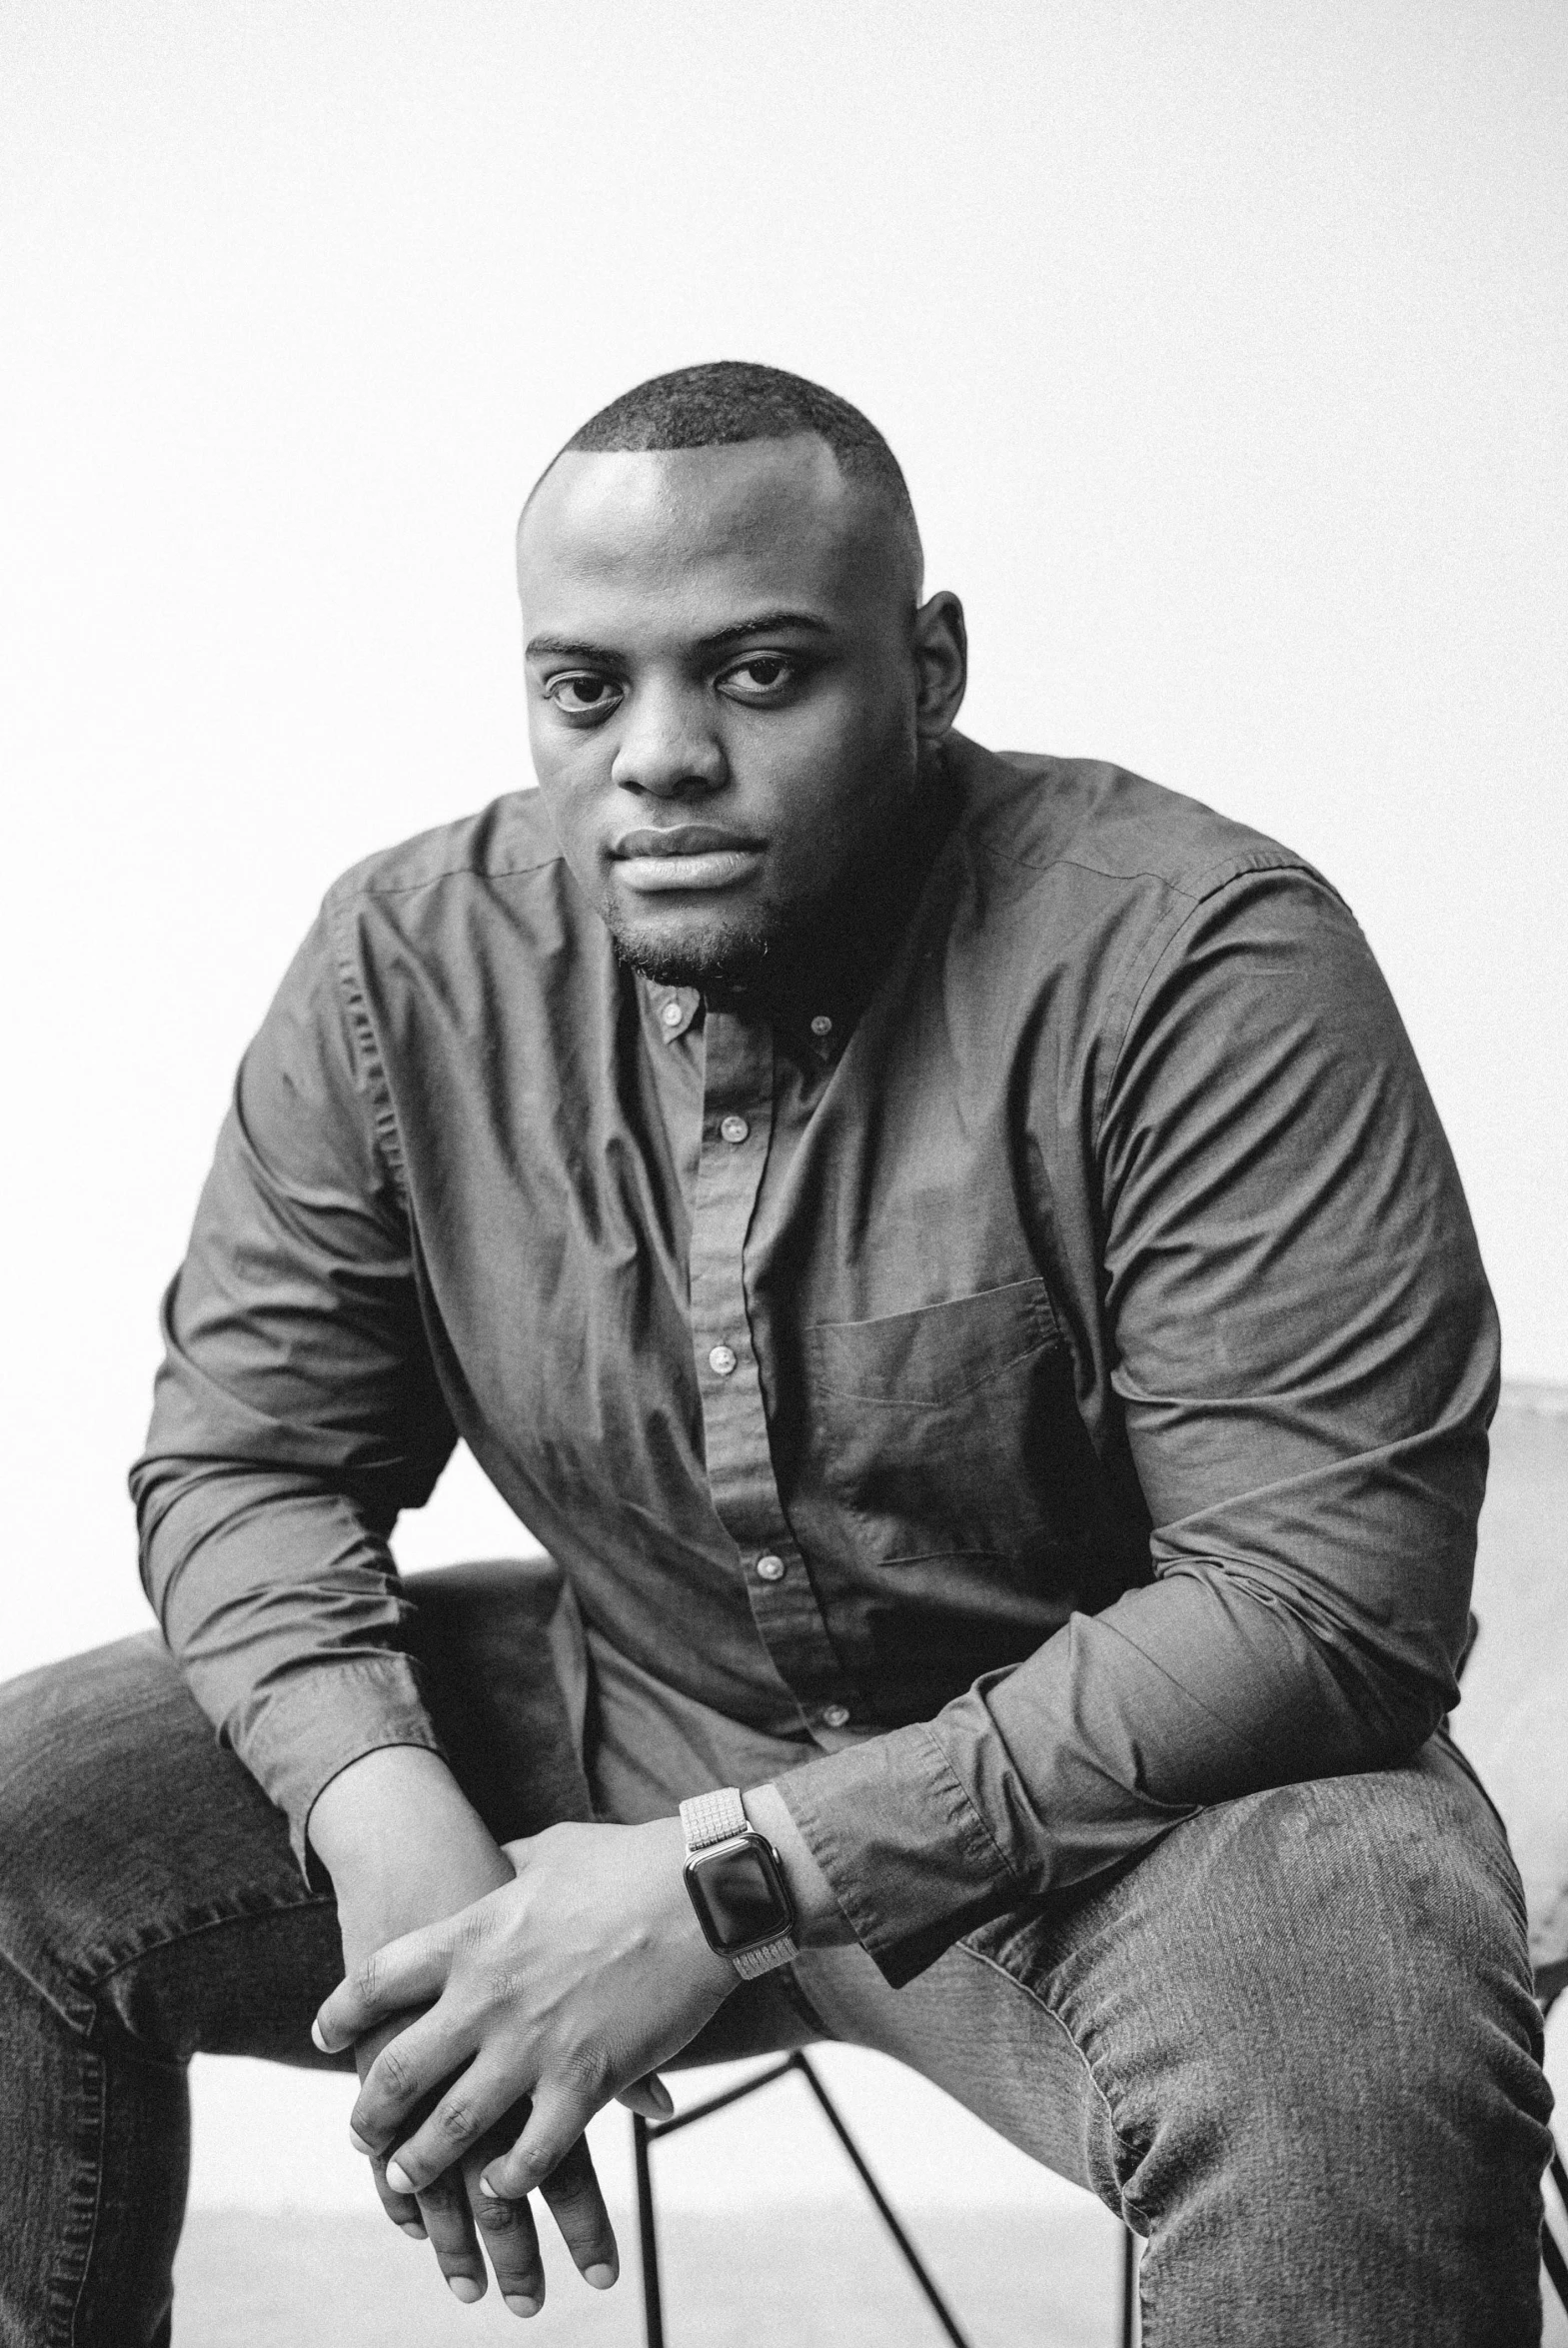 a black and white photo of a man sitting on a chair, pexels contest winner, black arts movement, in a dark teal polo shirt, antoine-jean gr, kehinde wiley, promotional image